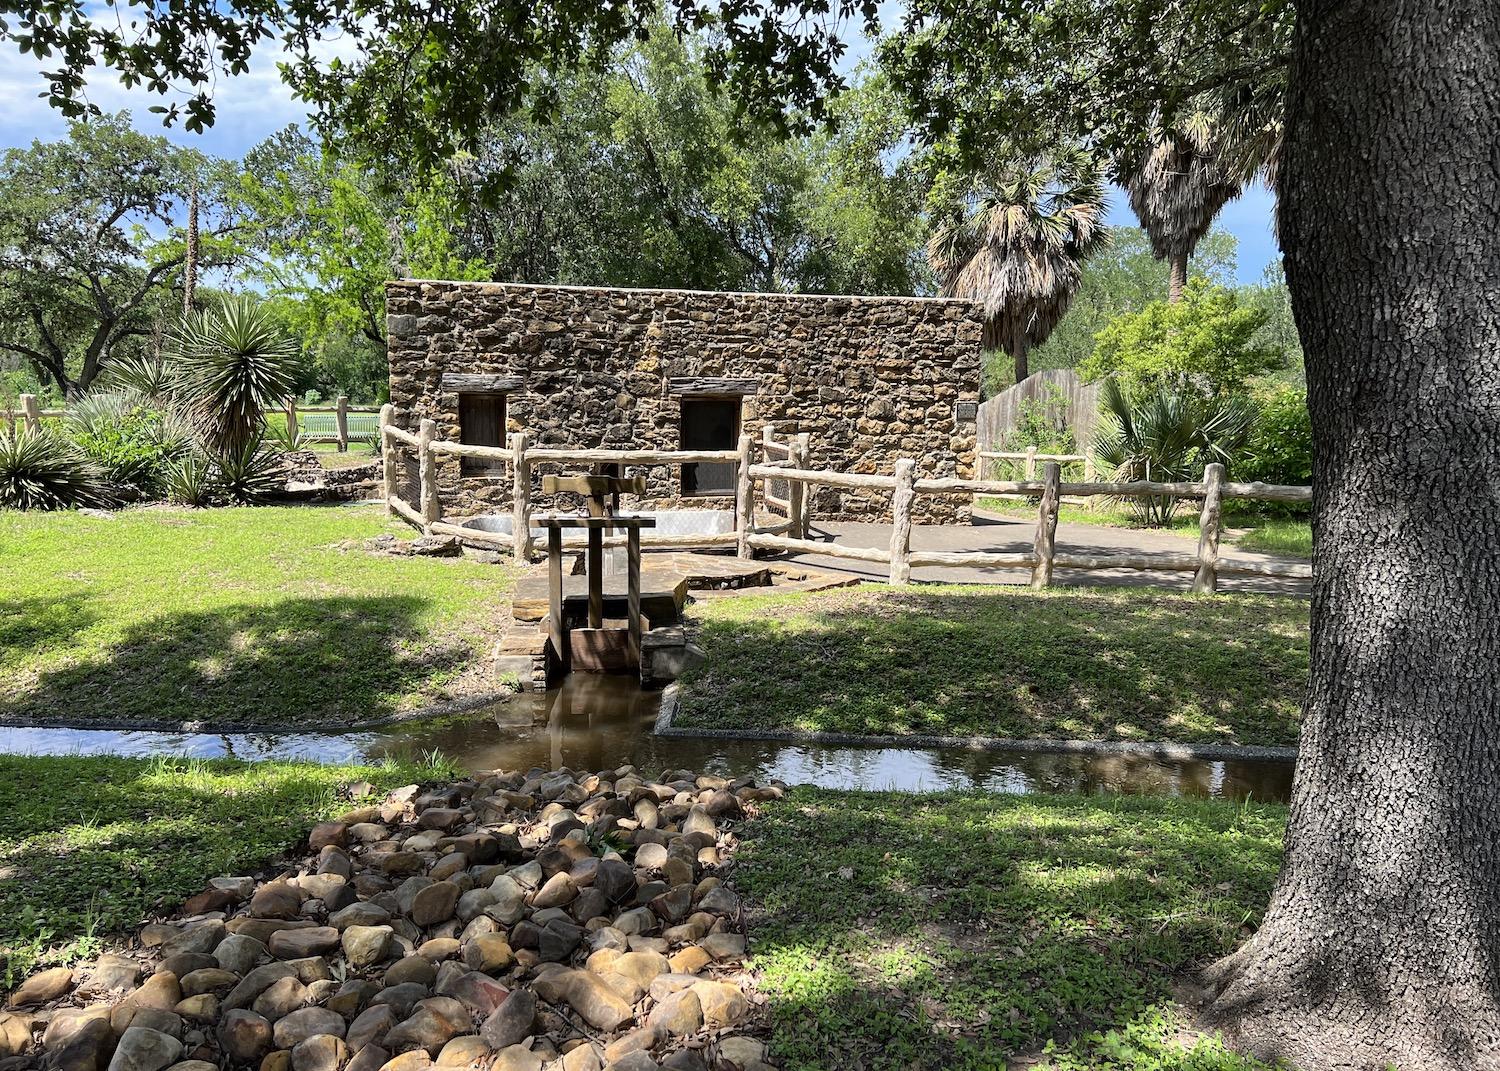 Behind the iconic church at Mission San José is the oldest grist mill in Texas and an acequia that's now on a closed-pump system so people can see how it works.